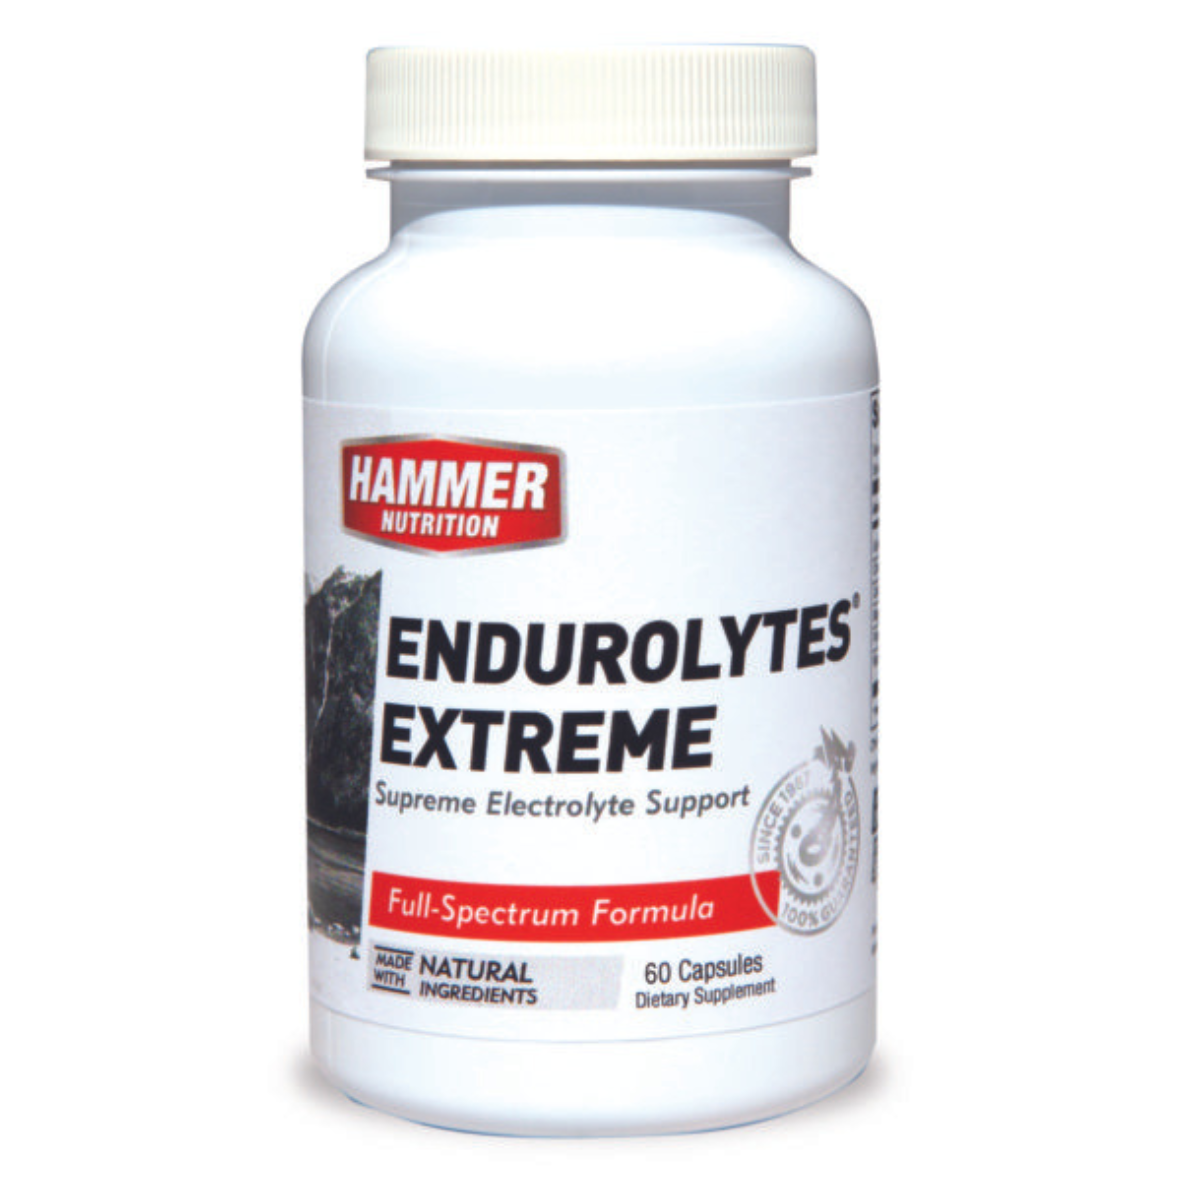 Hammer Nutrition Enduroltye Extreme electrolyte replacement